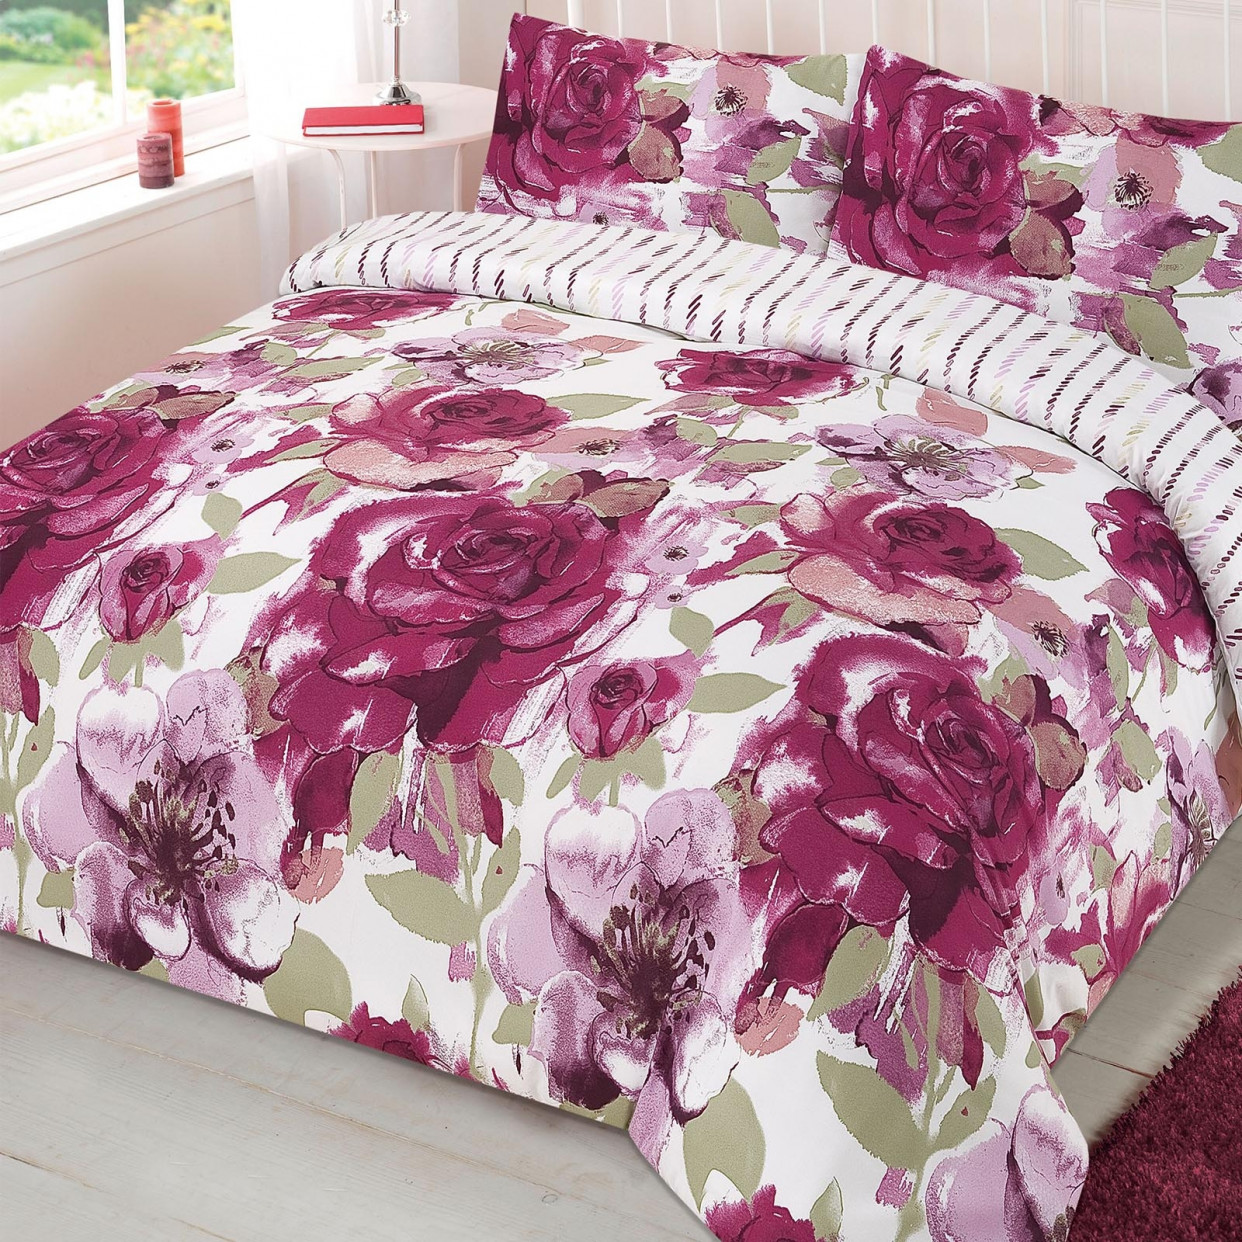 Floral Reversible Quilt Cover Pillowcase Bedding Set Cammi Purple White - King>